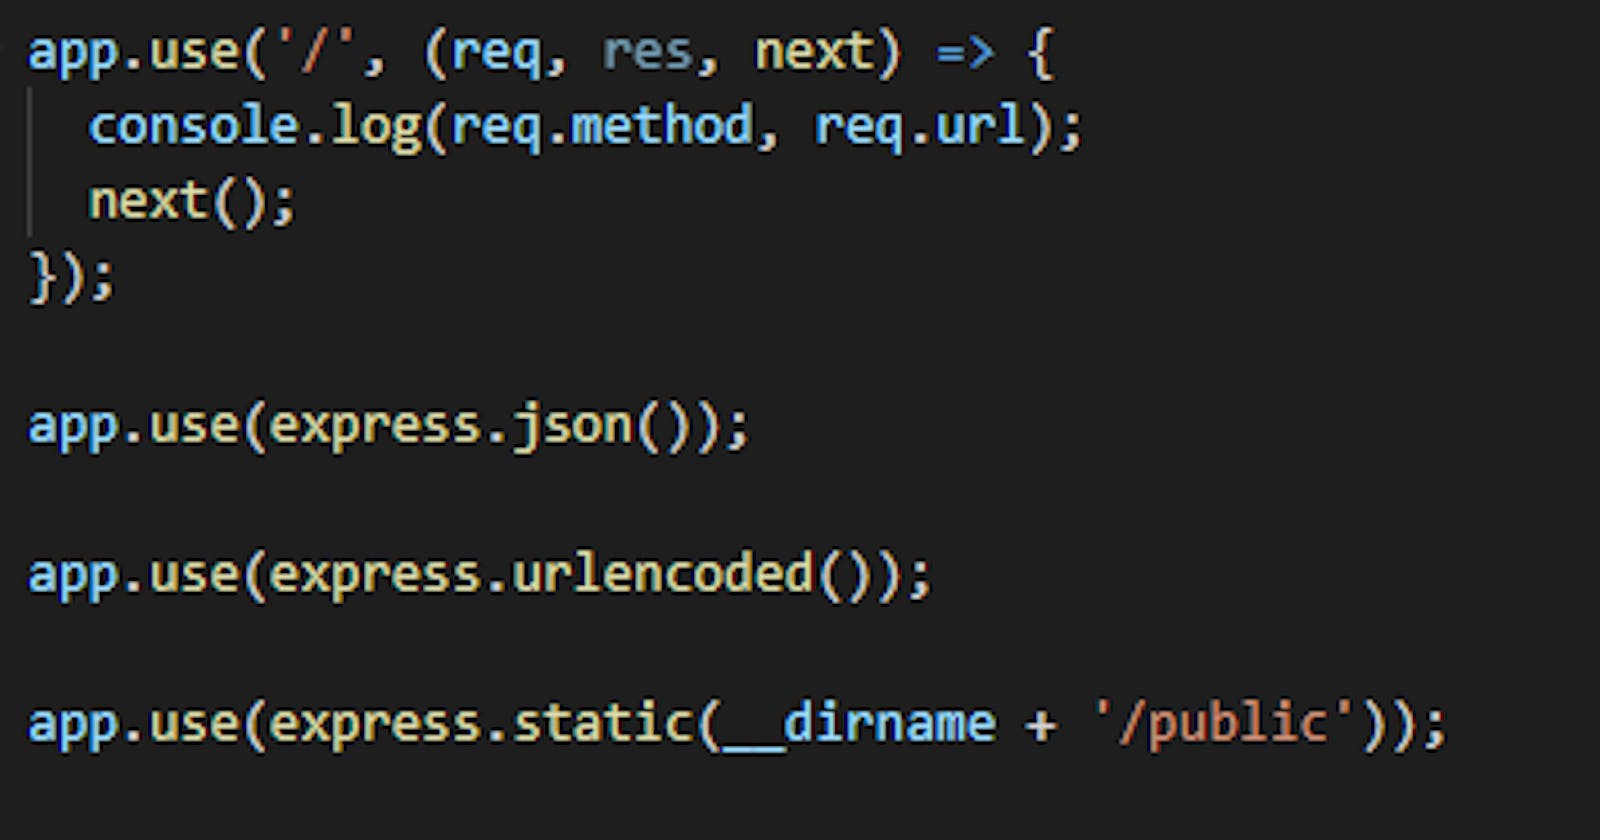 What are express.json() and express.urlencoded()?